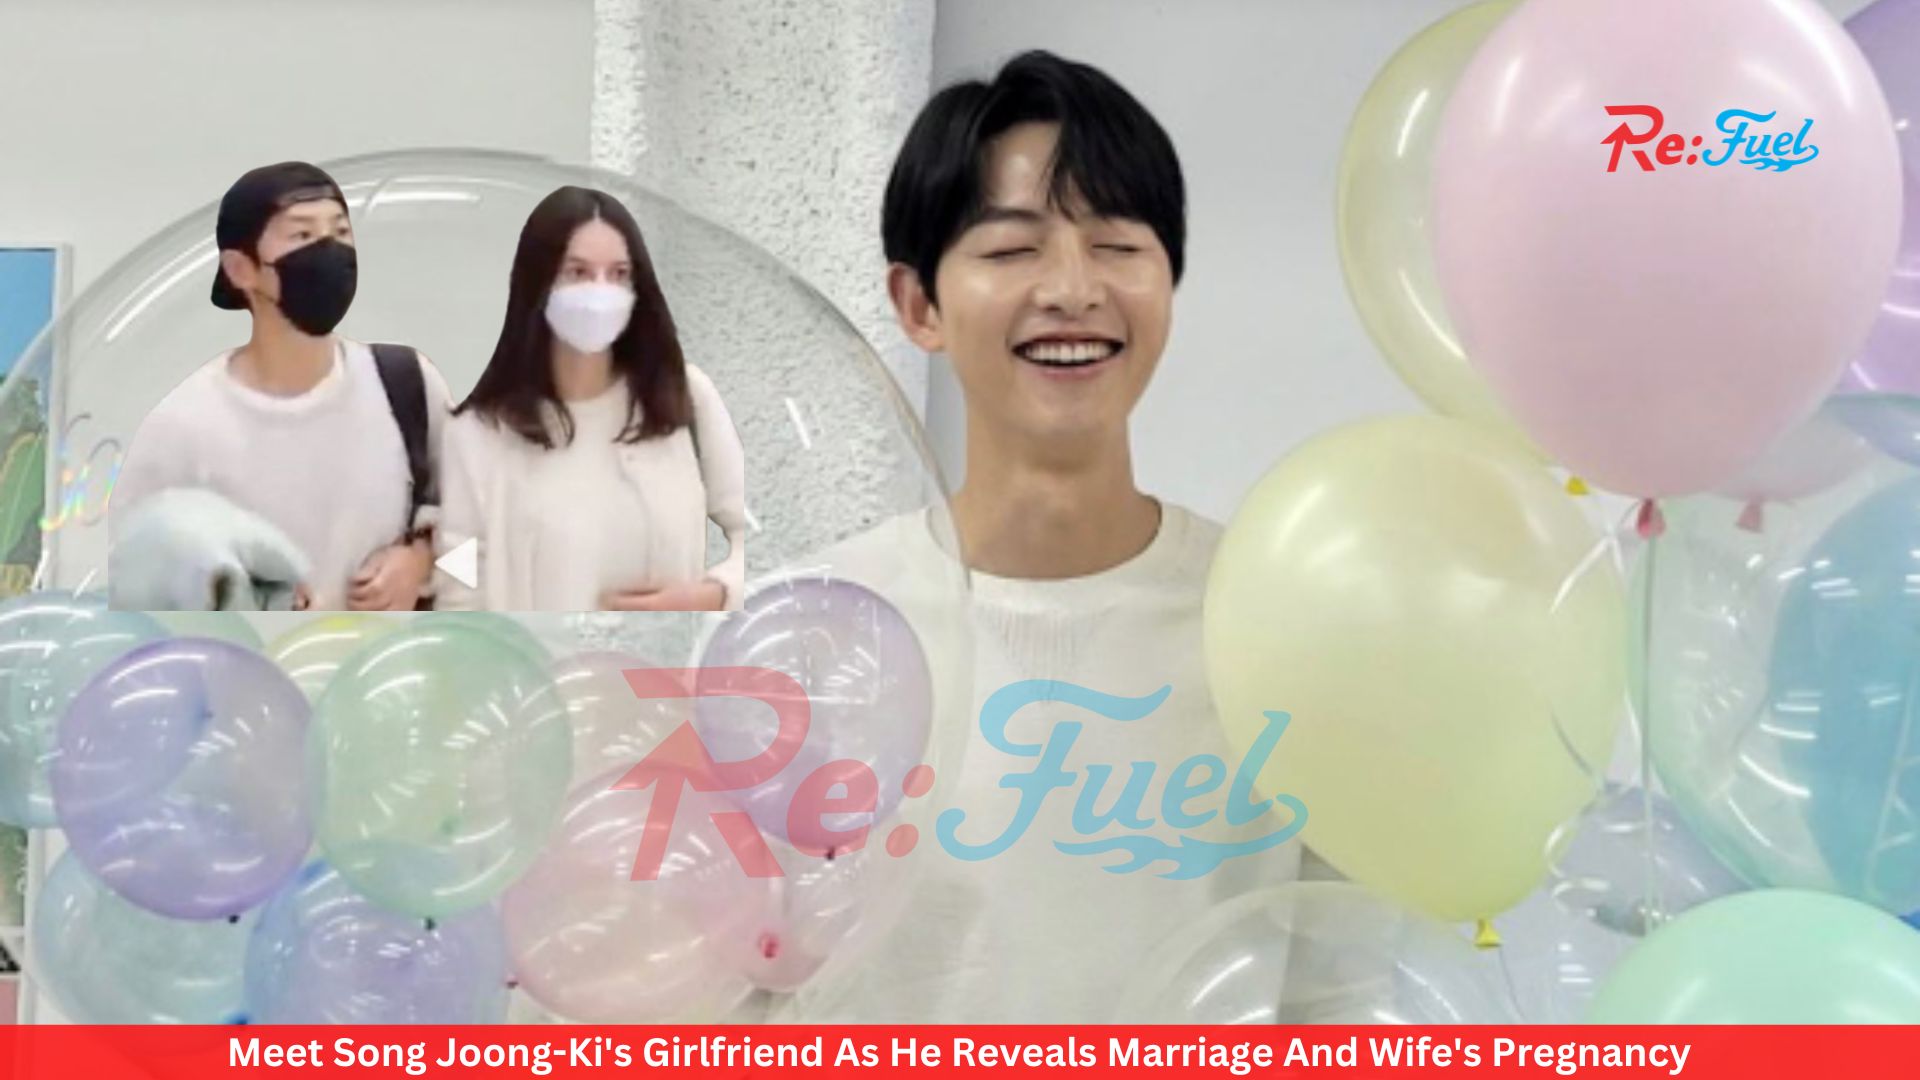 Meet Song Joong-Ki's Girlfriend As He Reveals Marriage And Wife's Pregnancy